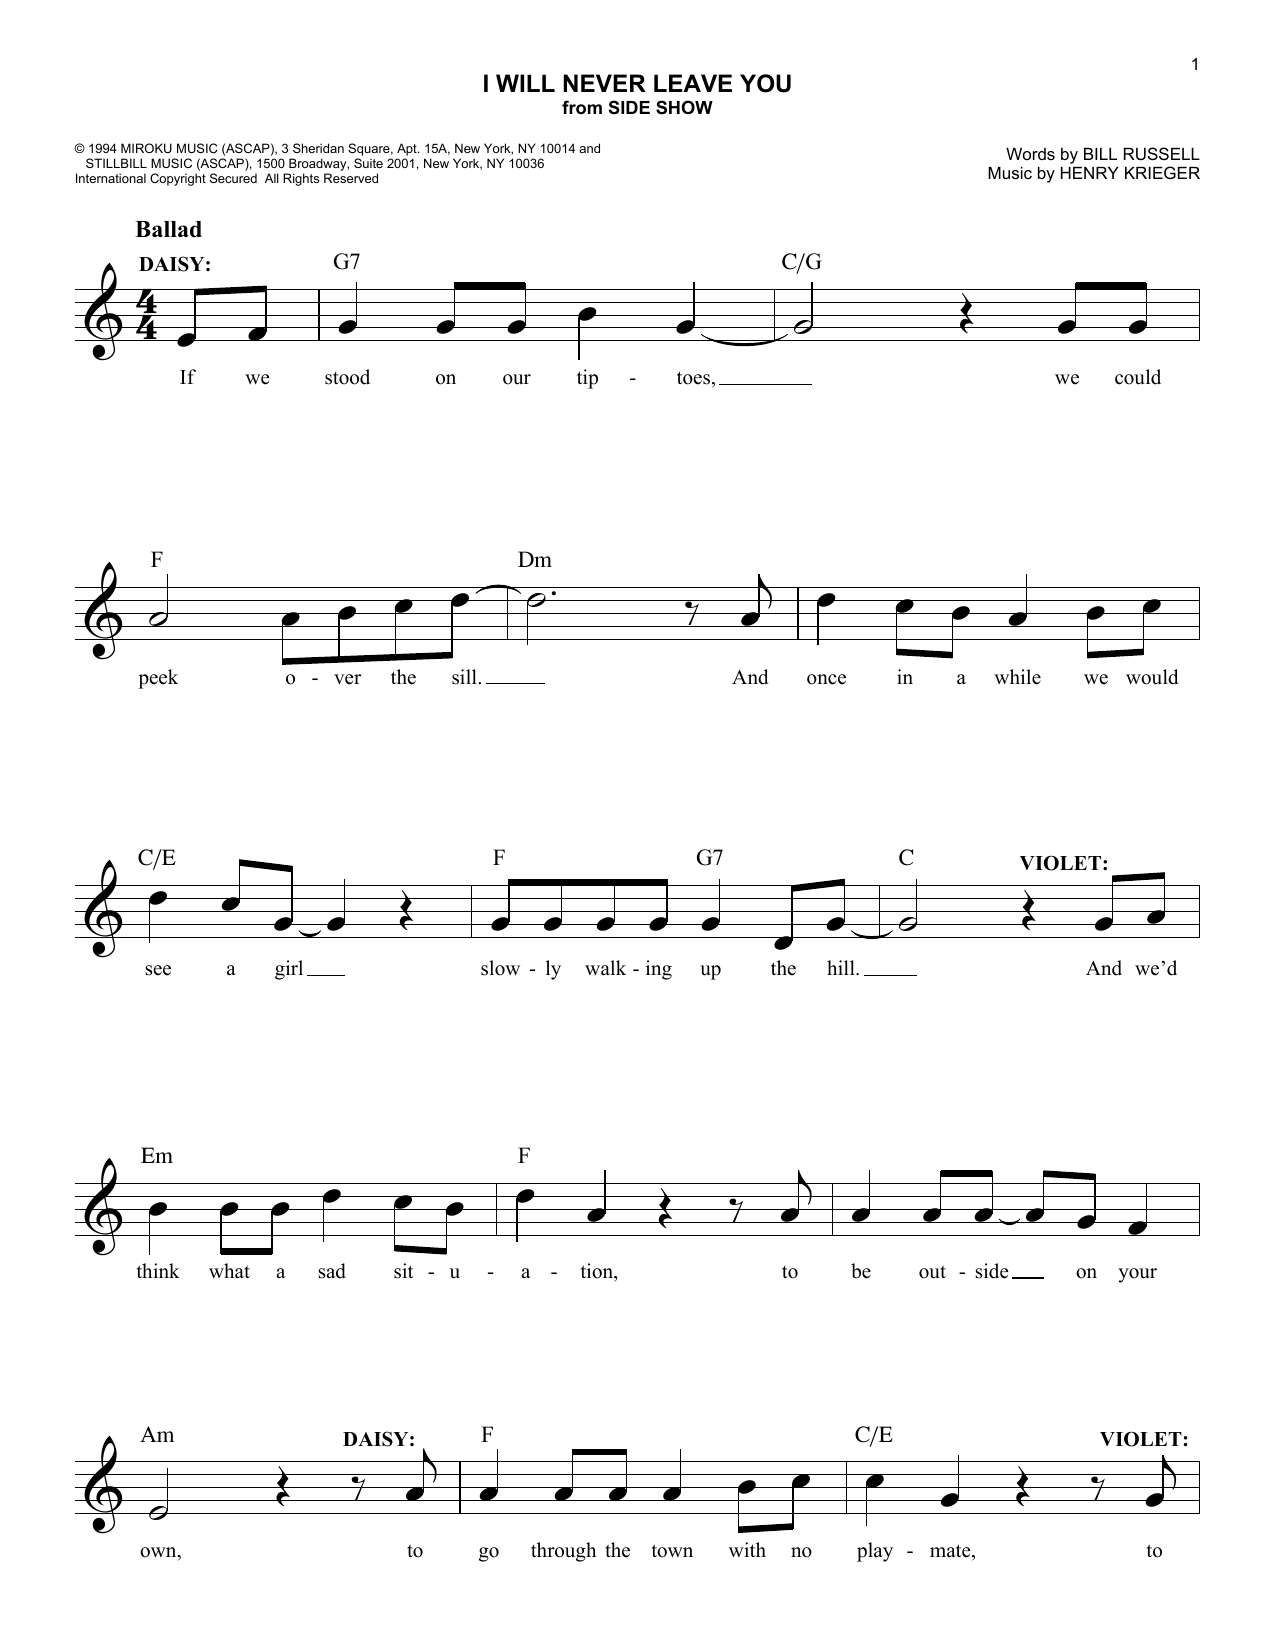 Download Henry Krieger I Will Never Leave You Sheet Music